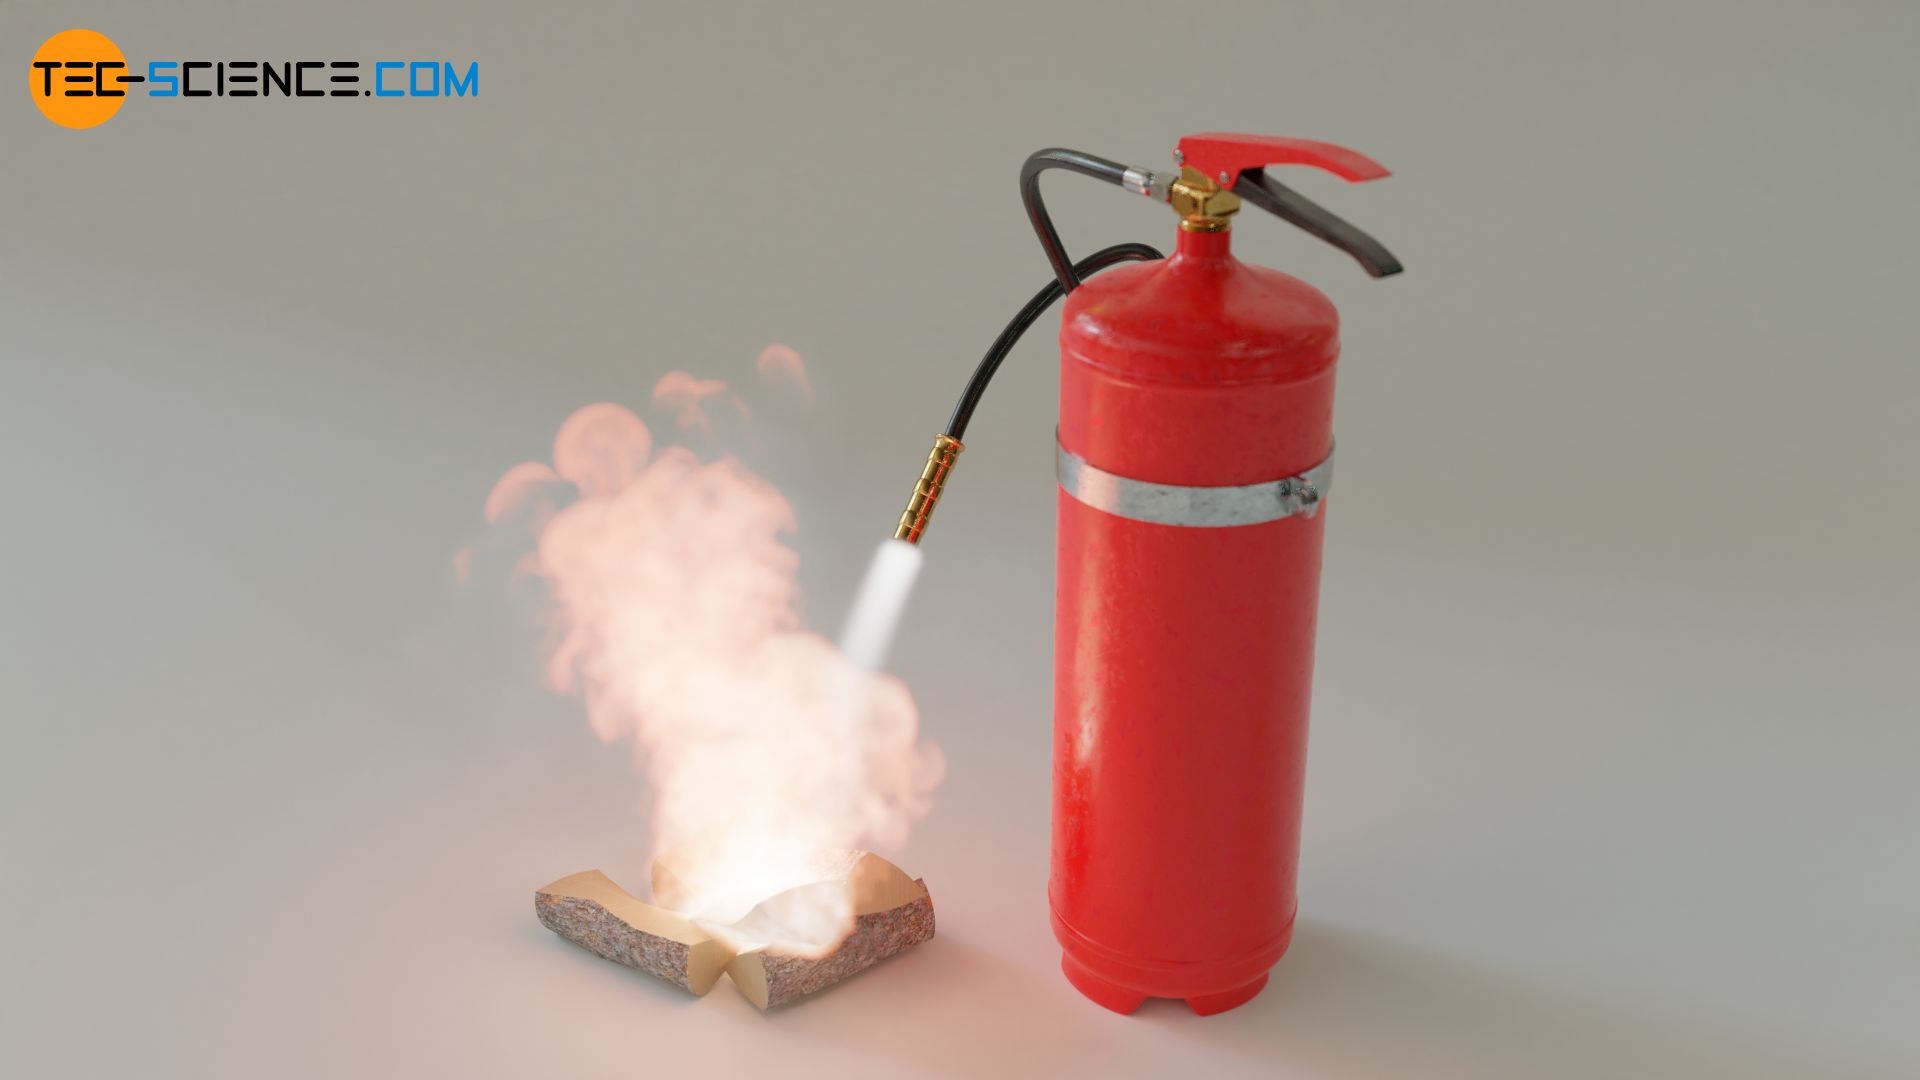 Why does water extinguish fire? - tec-science